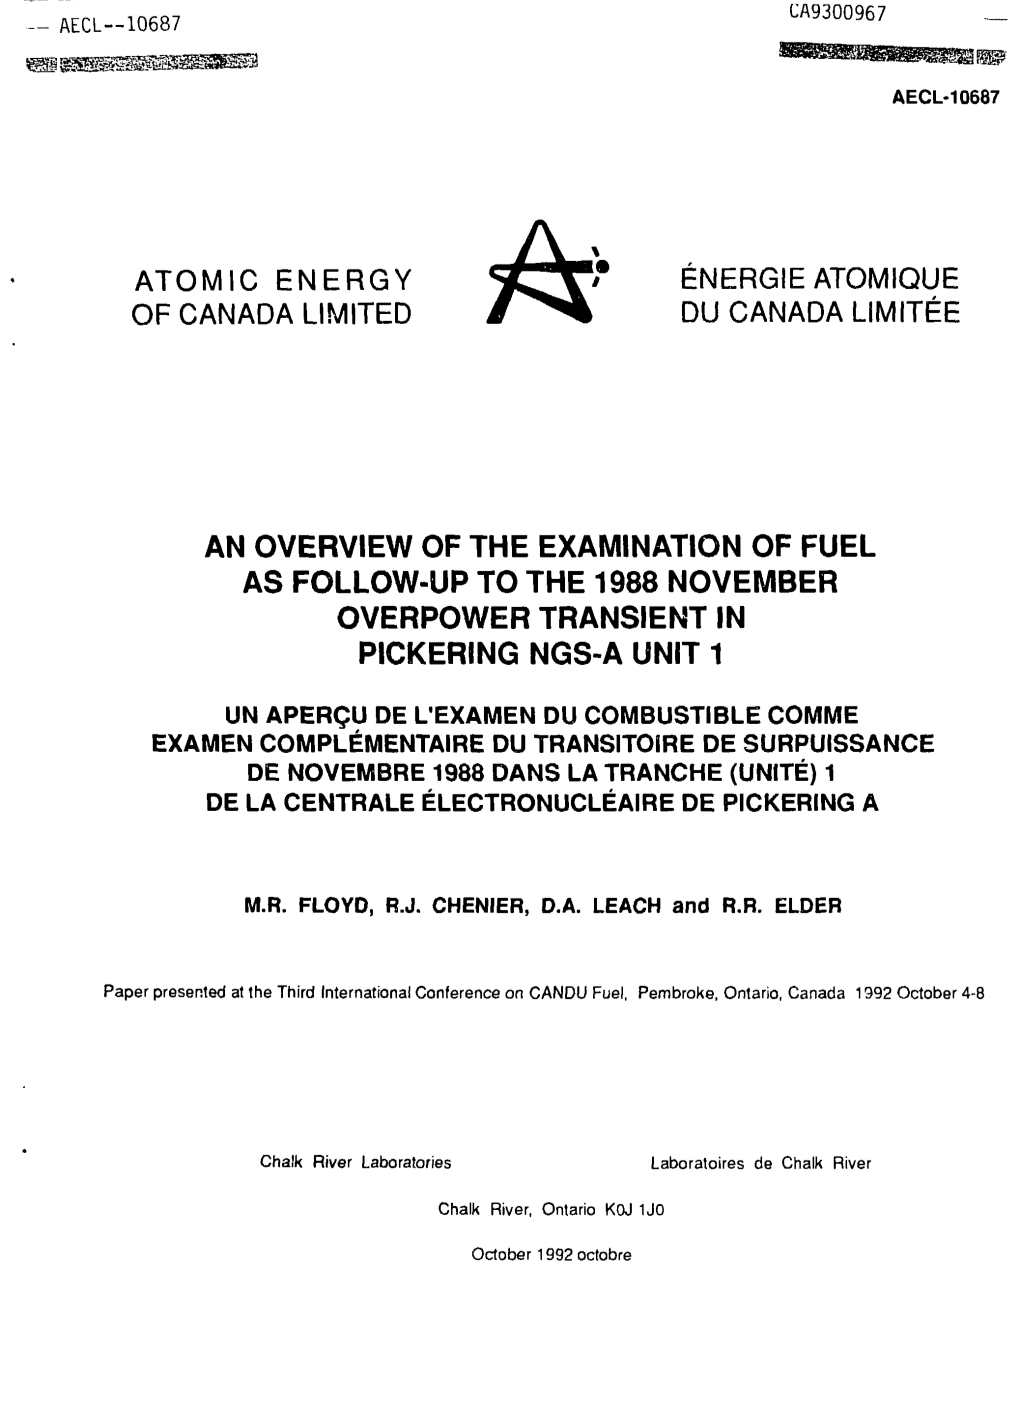 Atomic Energy • / . V 7 Energie Atomique of Canada Limited